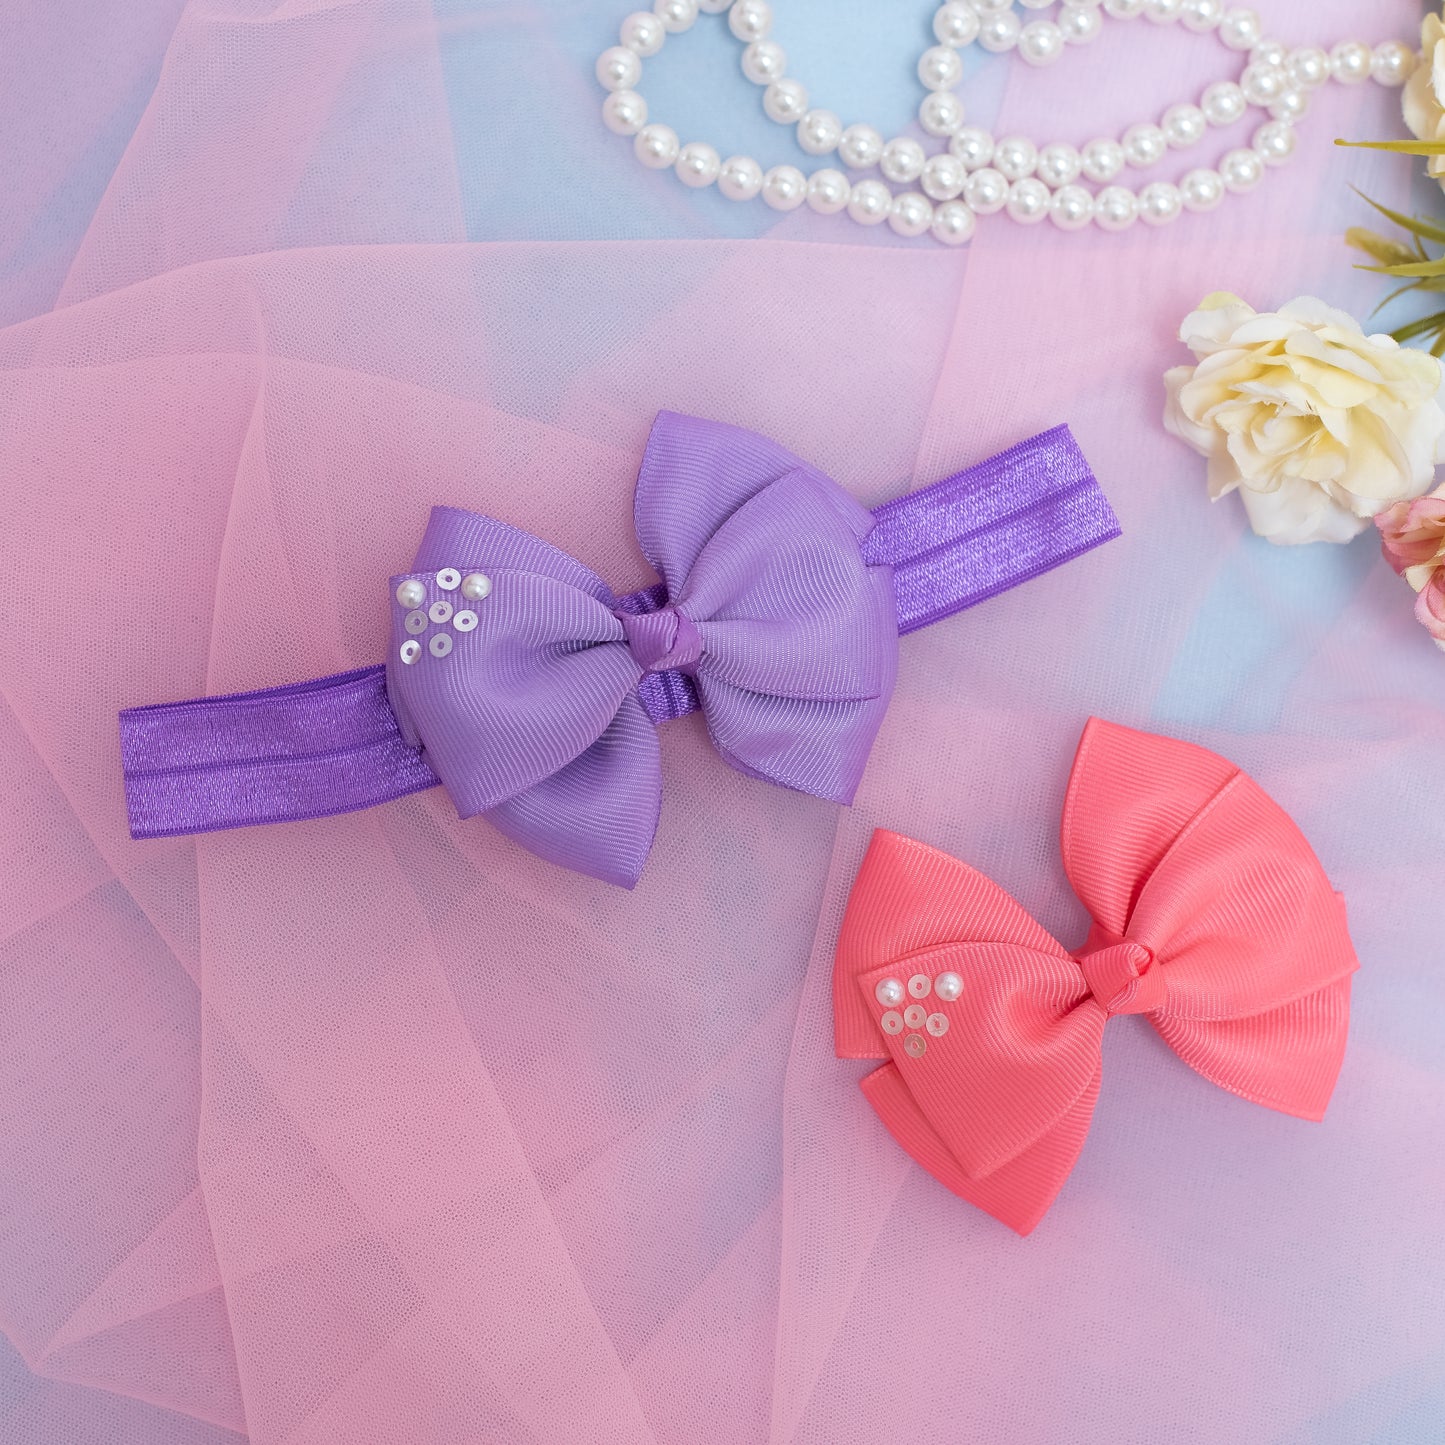 Combo: 1 Stretchy Band with 2 Layered Bows embellished with Sequinze and Pearls - Peach, Purple